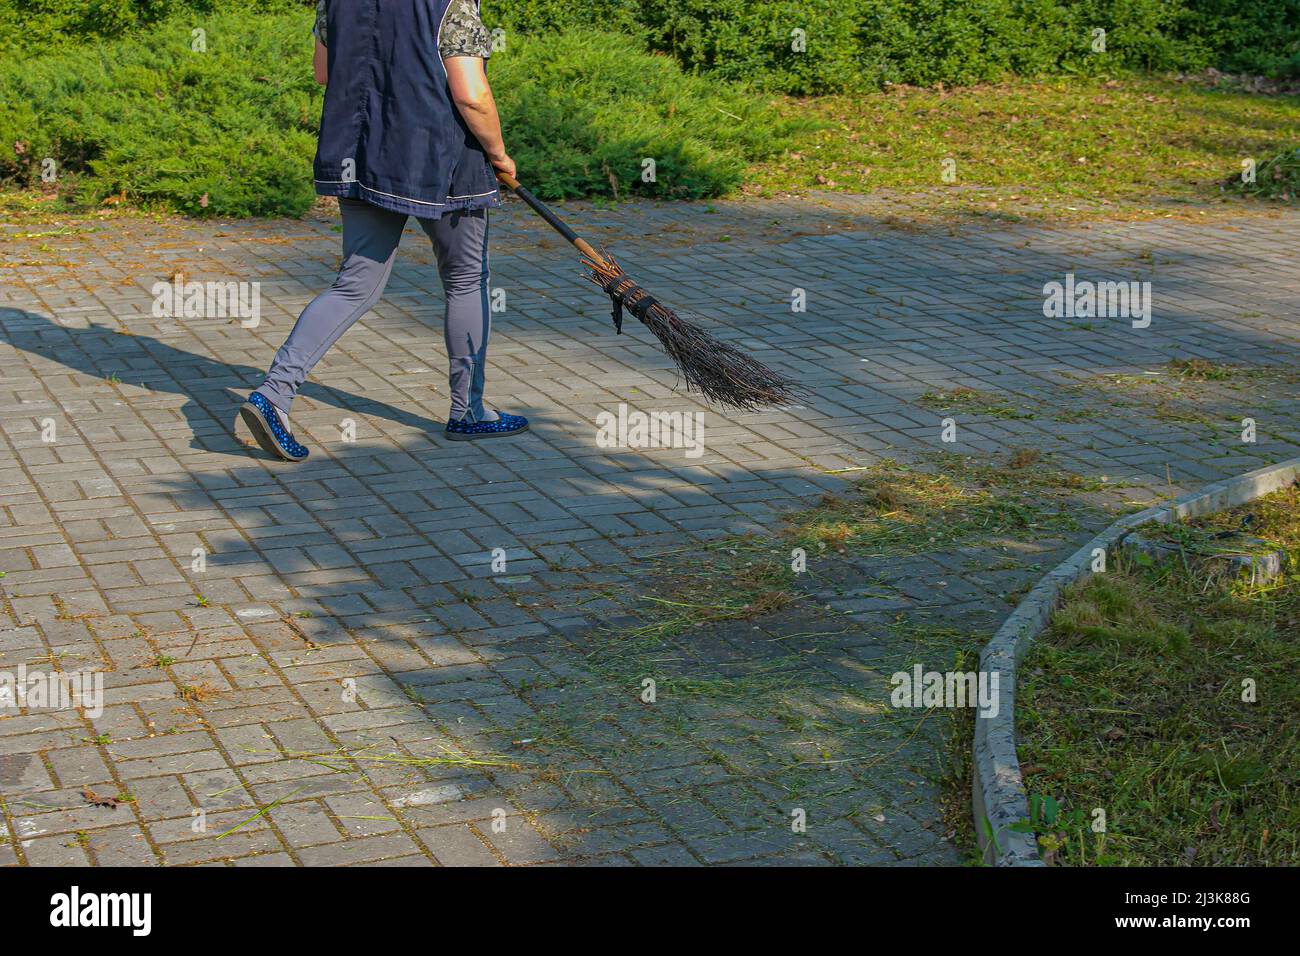 A woman sweeps fallen leaves with a broom on the street. The municipal service monitors the cleanliness in the city. Stock Photo